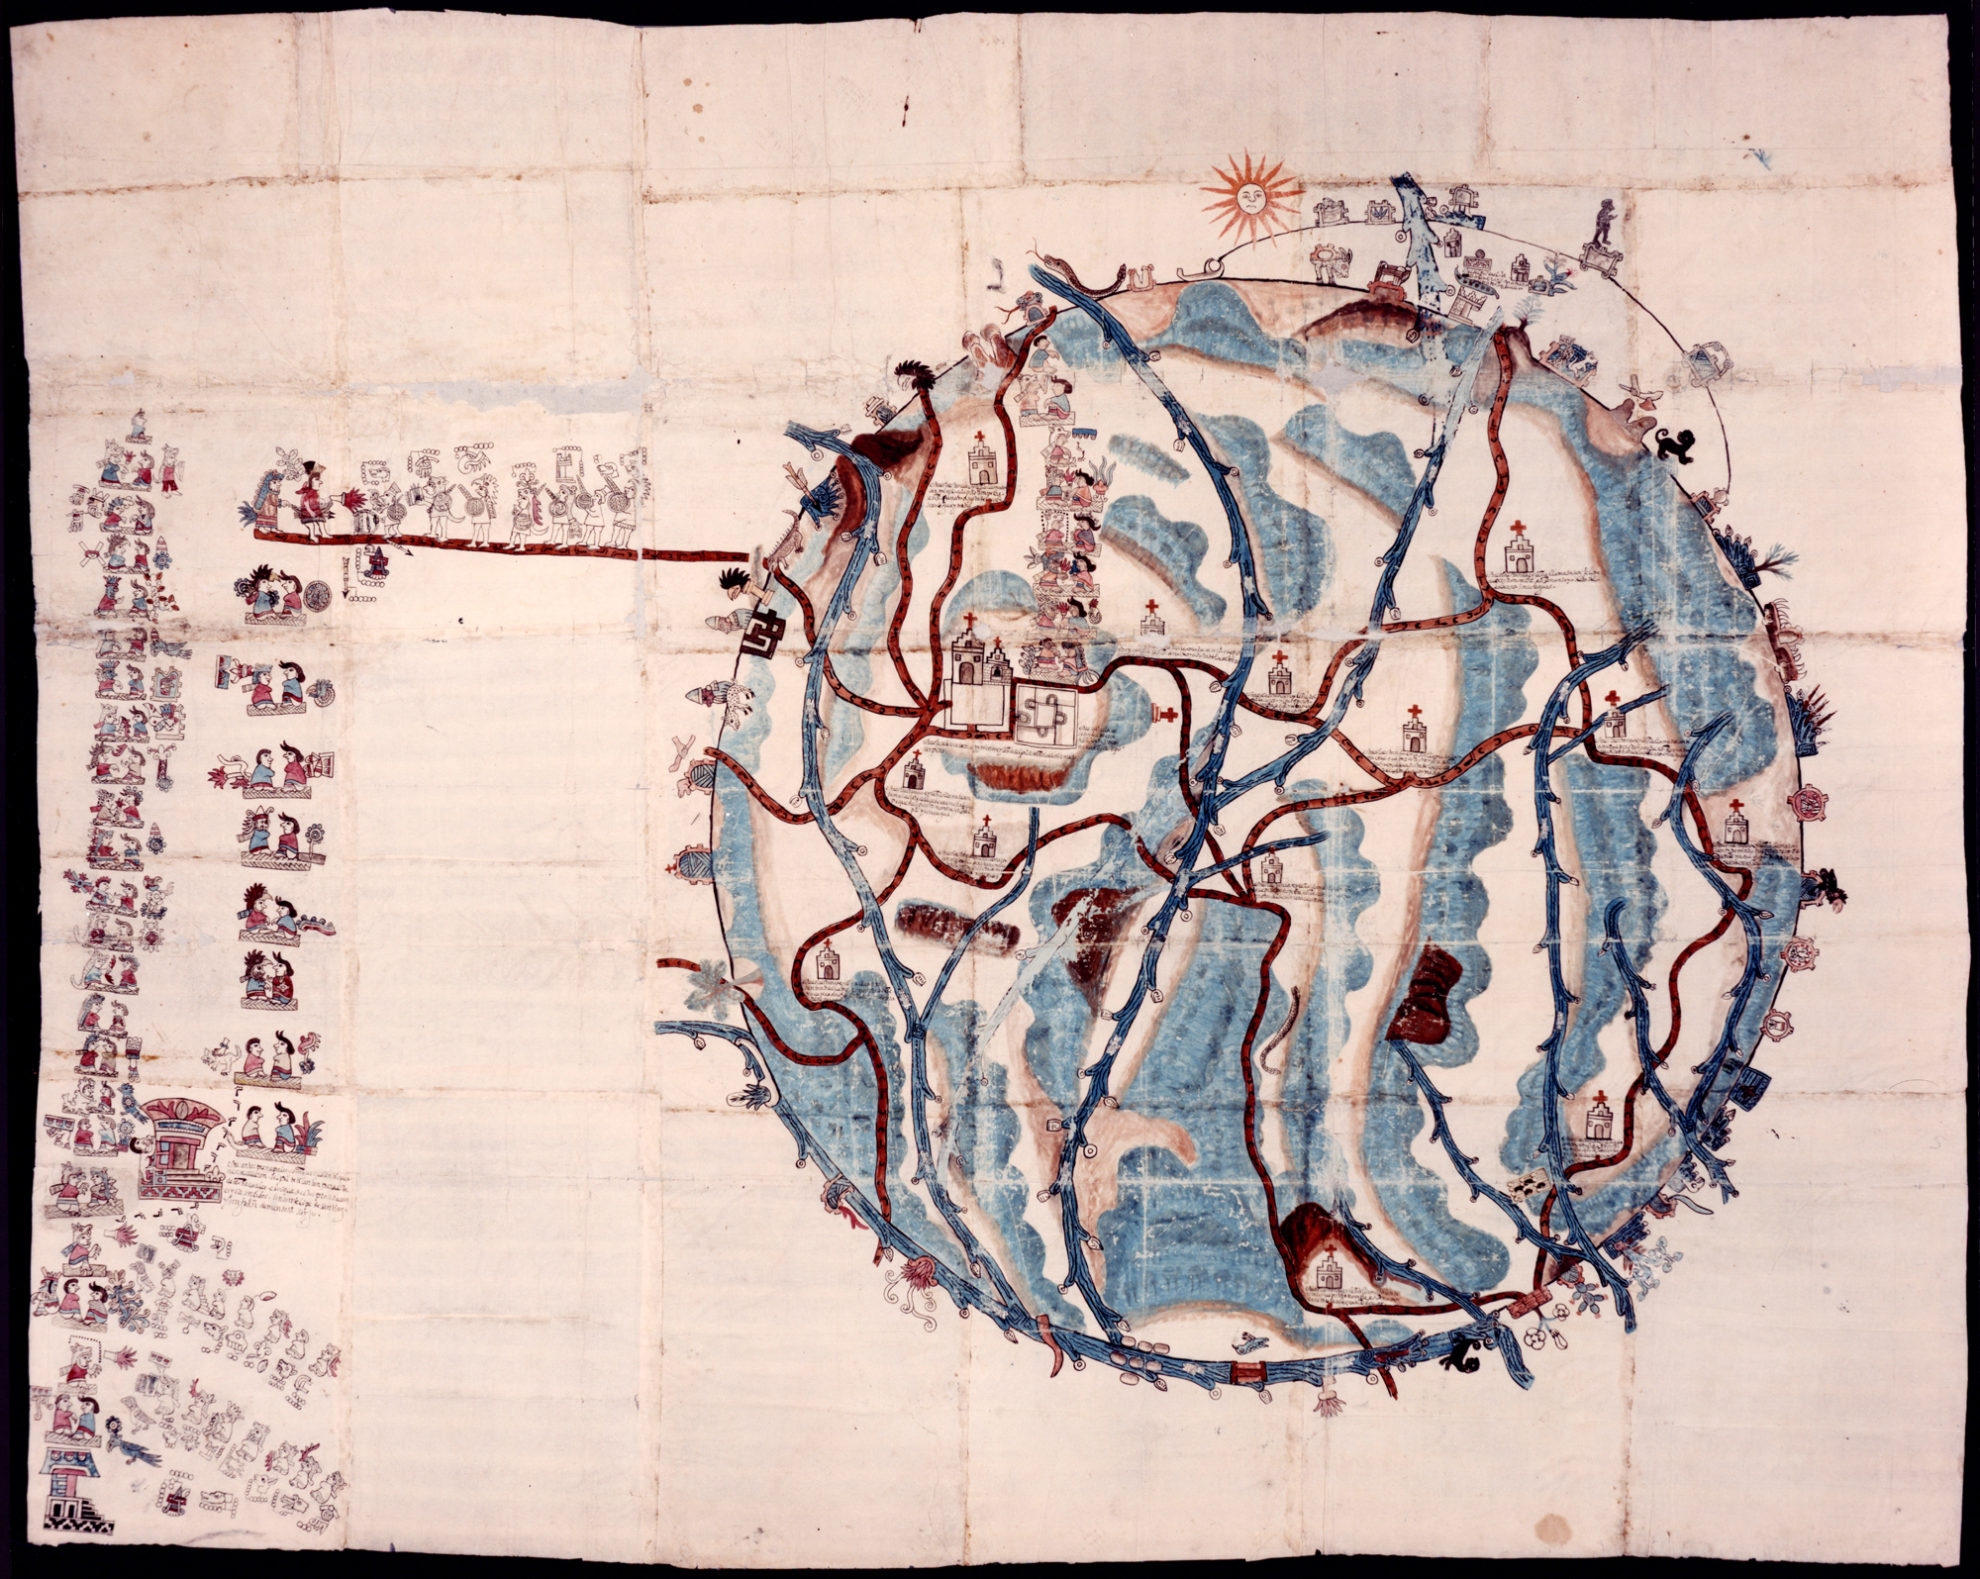 16th century map organized in a circular shape, with various architectural structures, water and road ways marked. On the left side, a column of figures represent ten generations of local rulers.